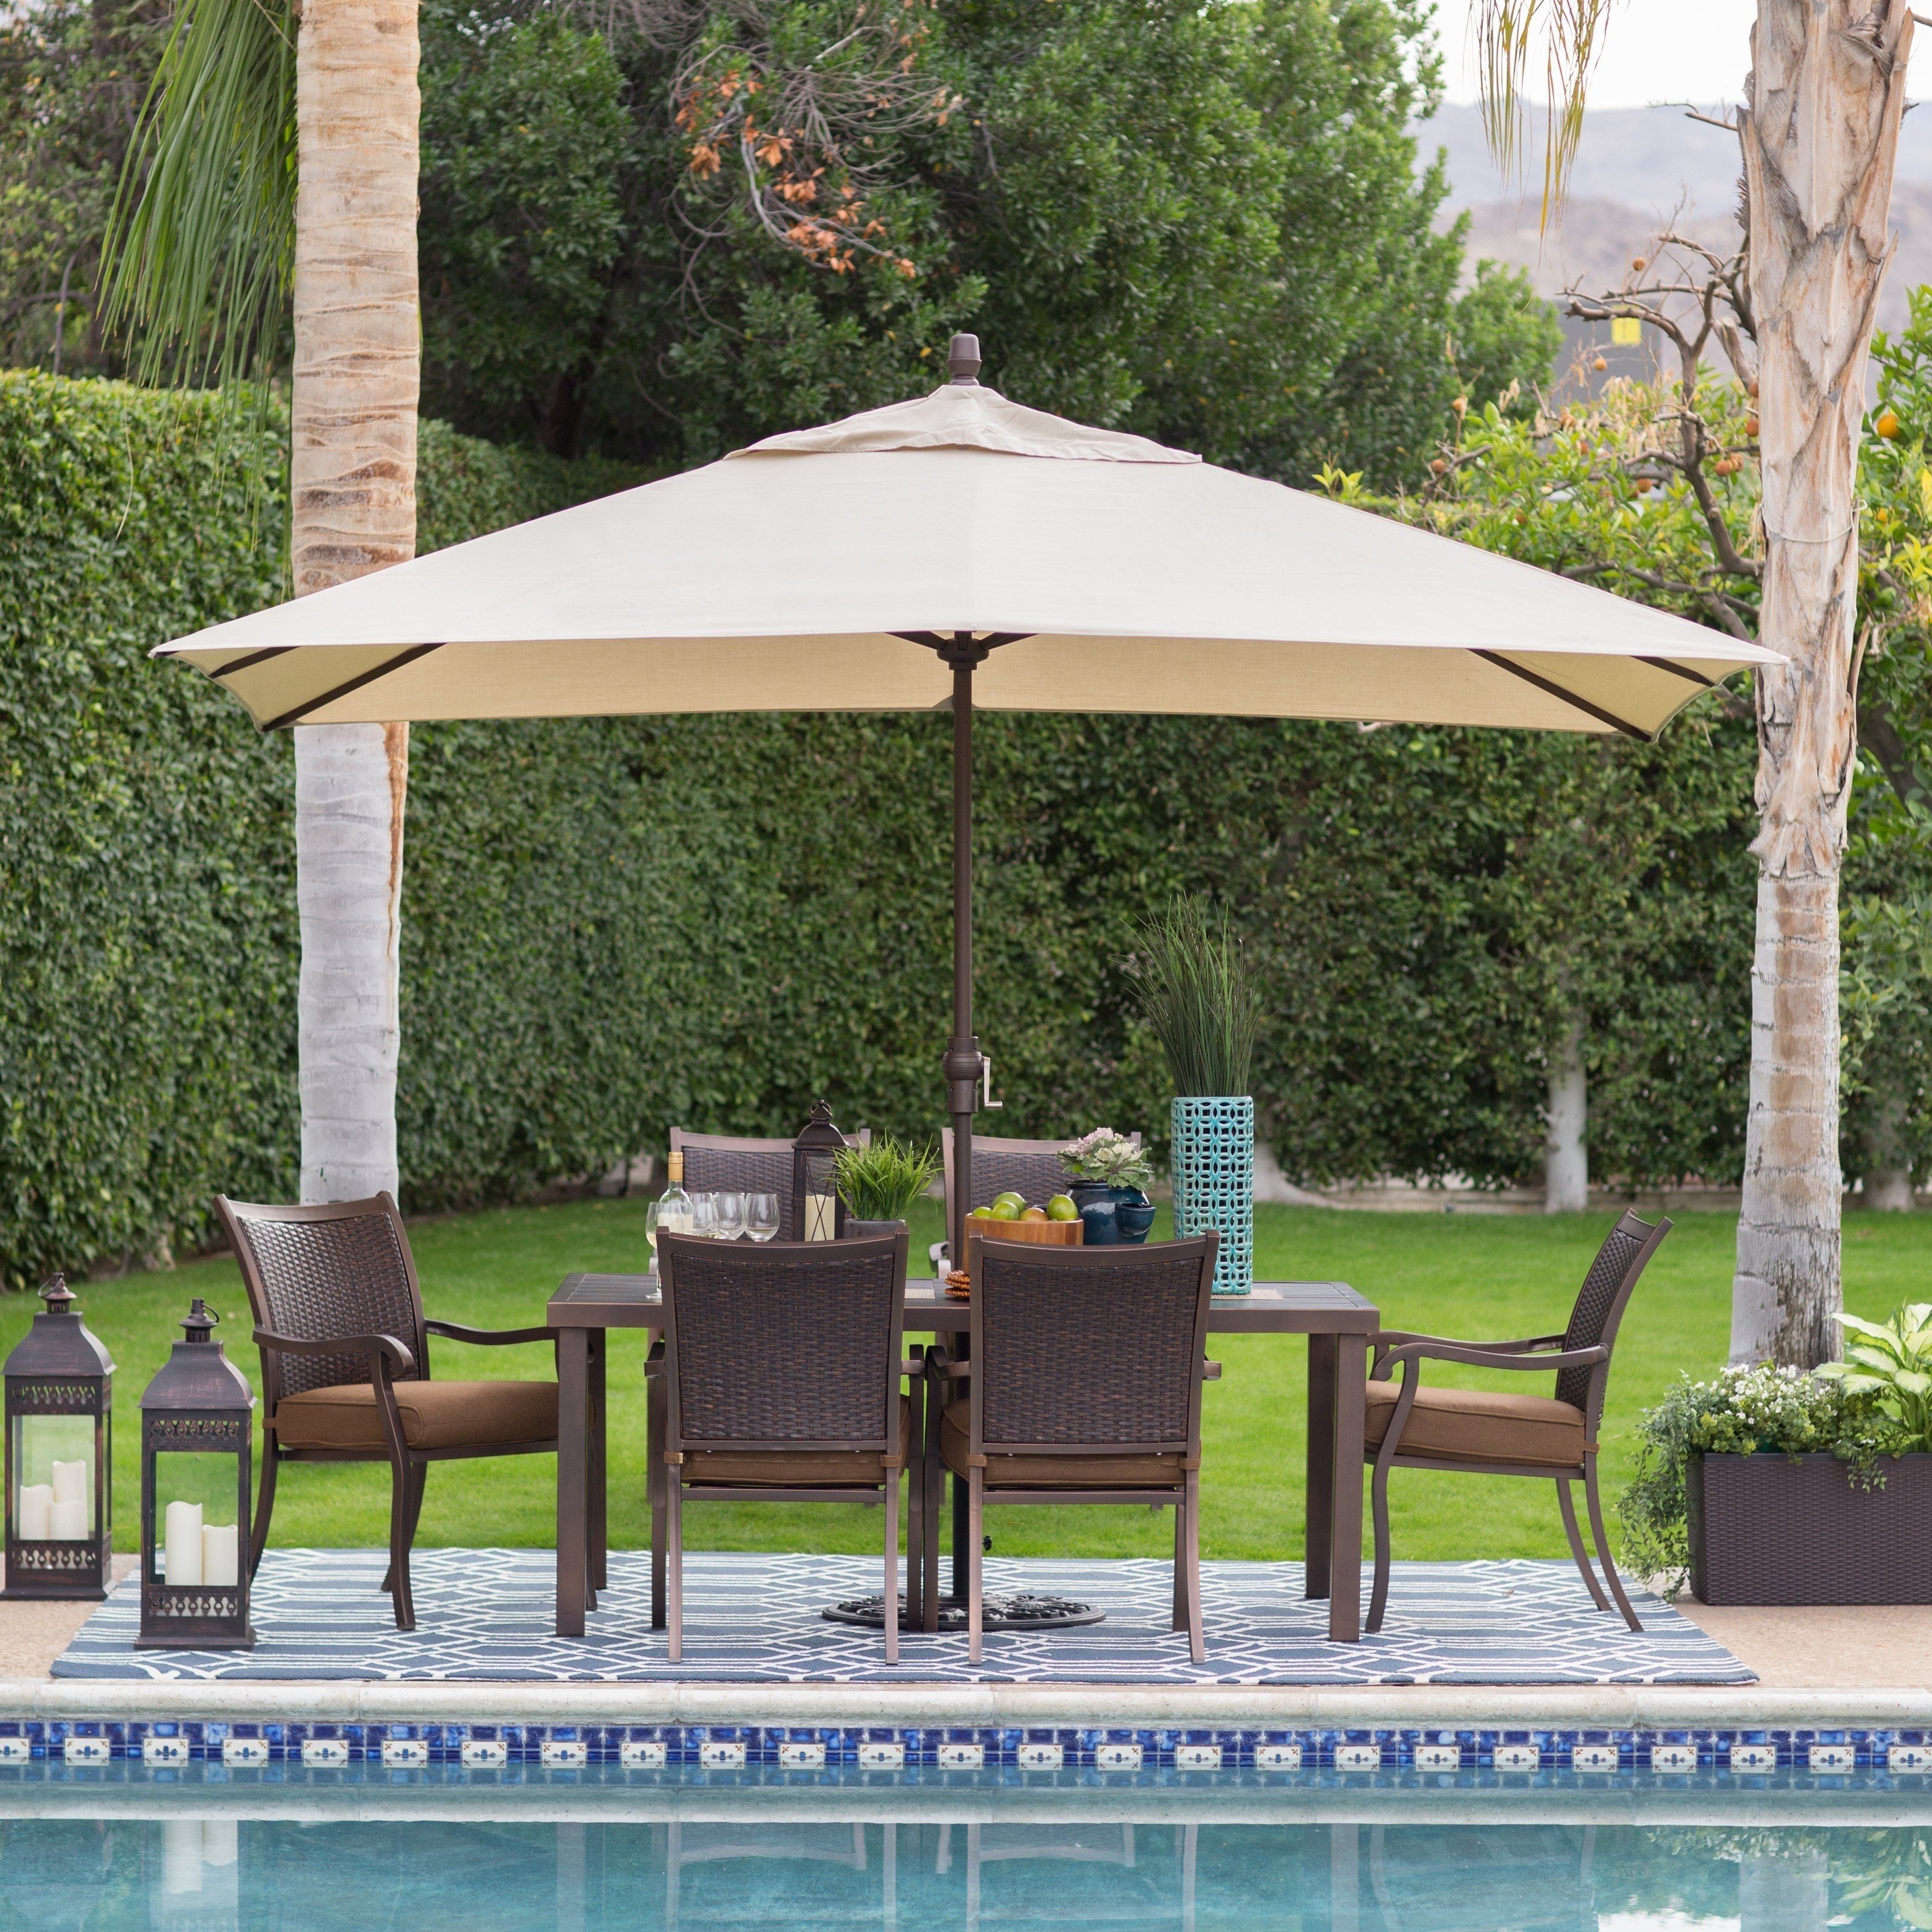 Newest Offset Patio Umbrella Clearance New 50 Cool Patio Umbrellas At For Walmart Patio Umbrellas (View 4 of 20)